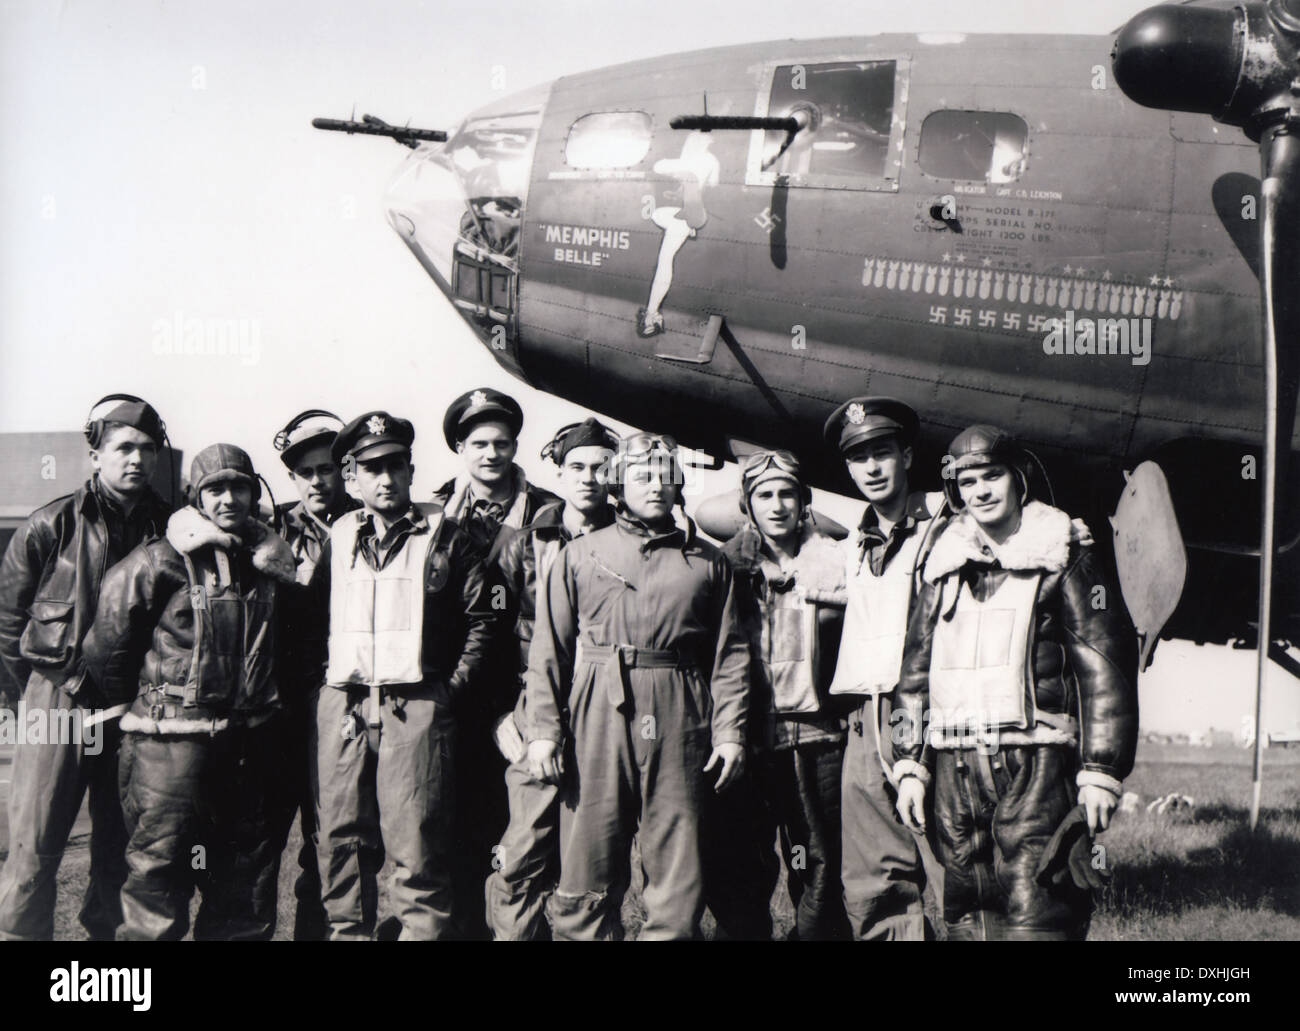 MEMPHIS BELLE  Crew of B-17 Flying Fortress at Bassingbourn on 7 June 1943 after completing 25 sorties - see Description below Stock Photo